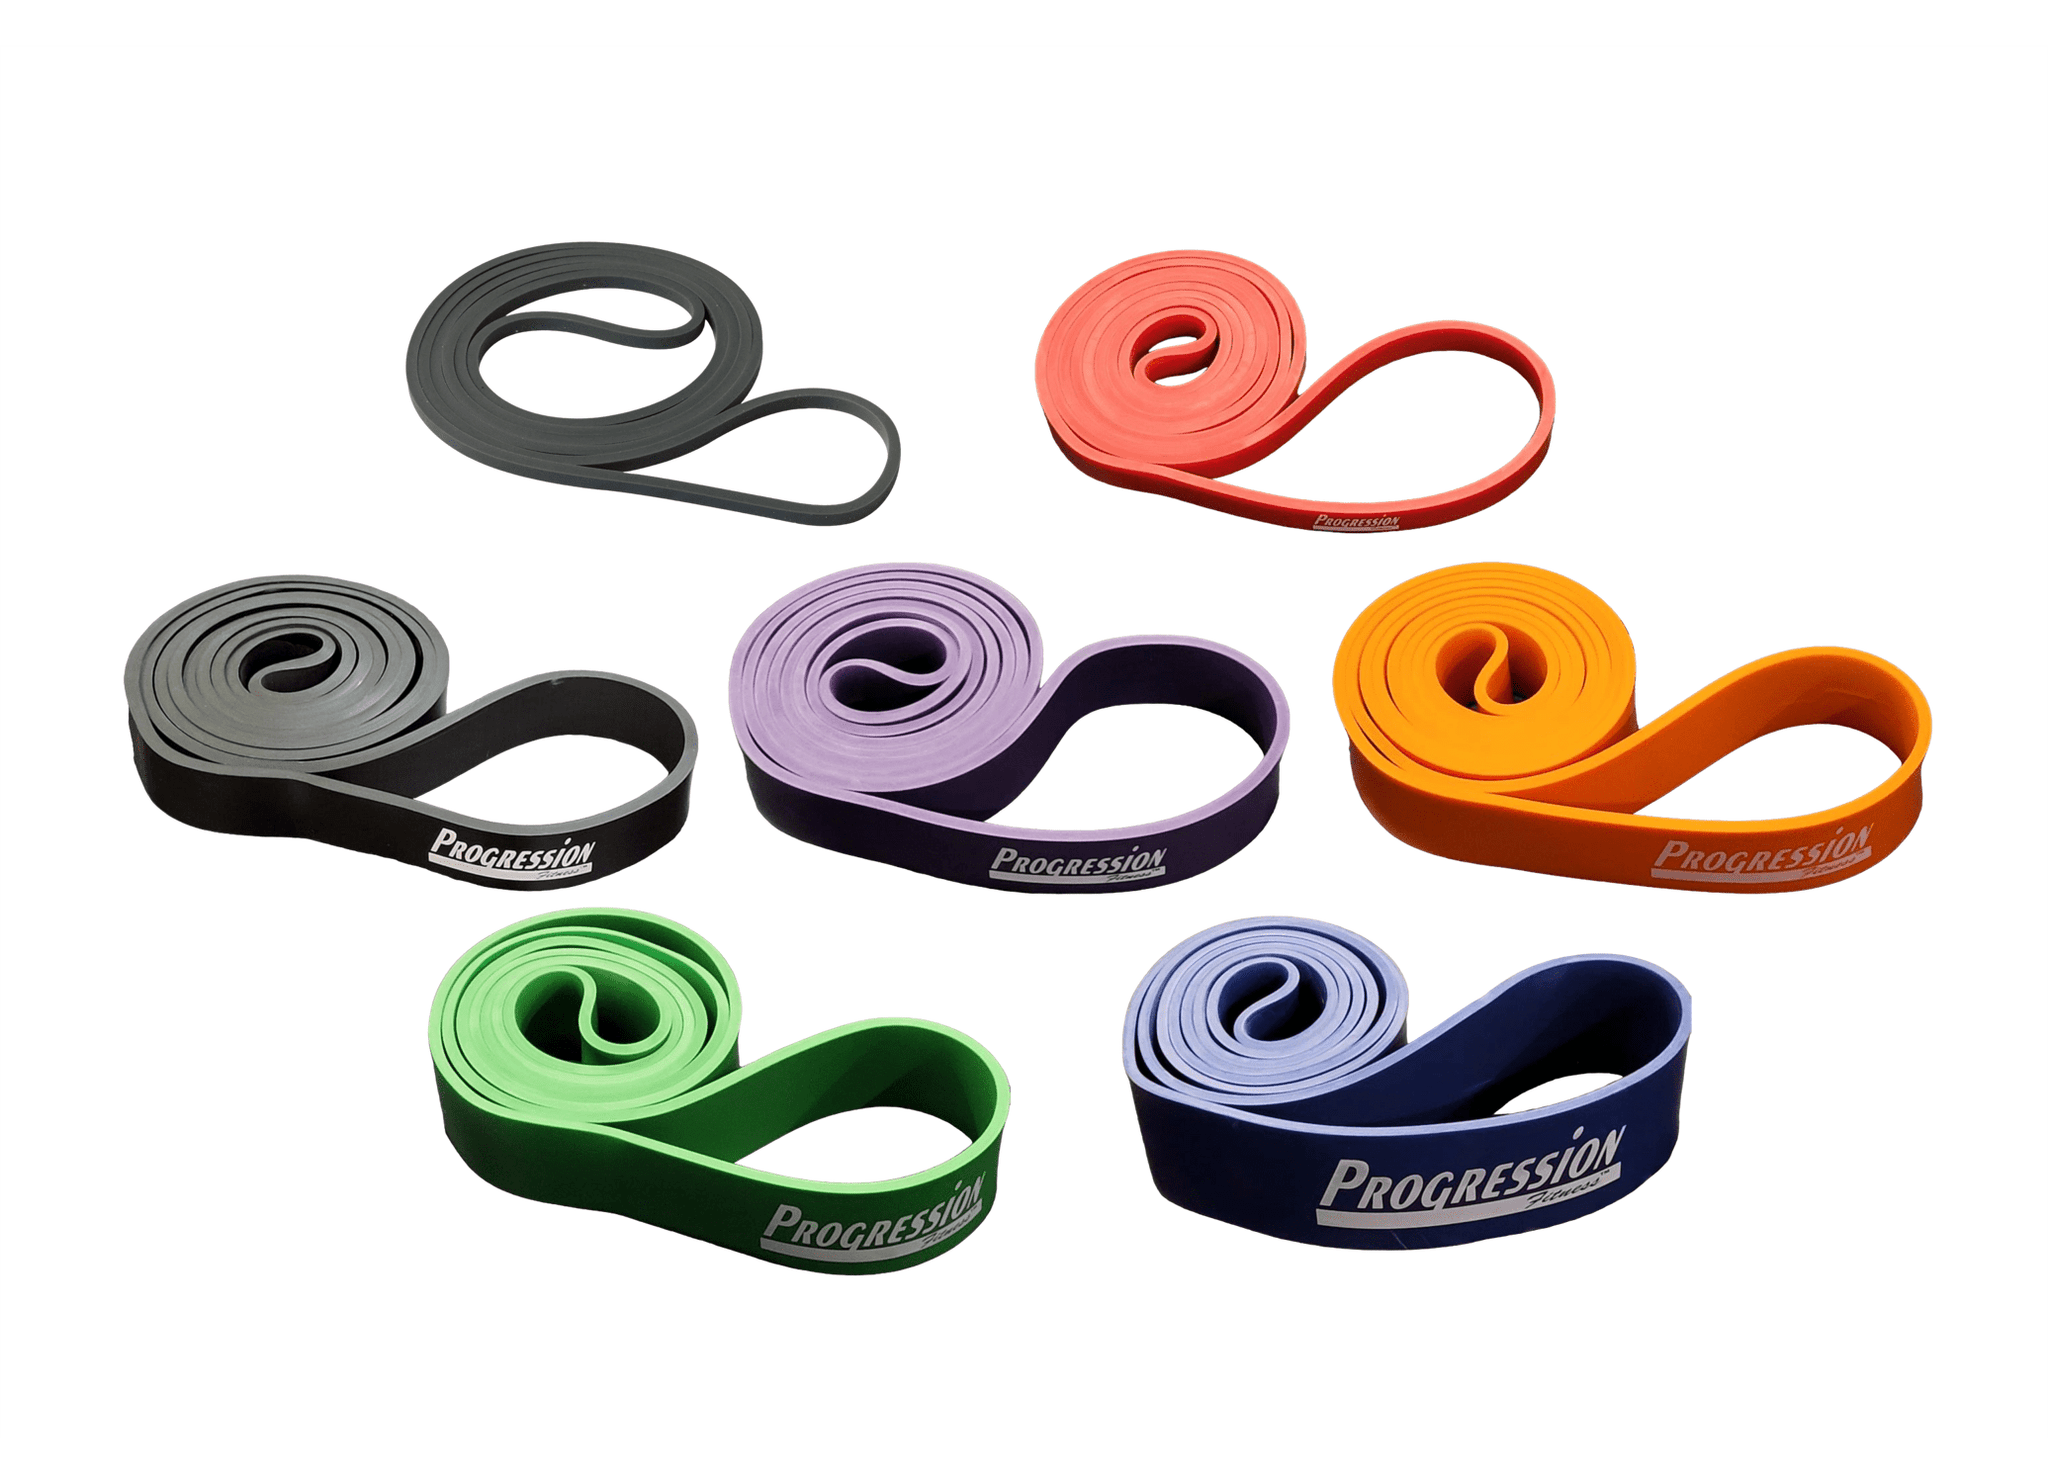 Resistance Bands: Are They Way Better Than Yoga Belts? - POWERBANDS®